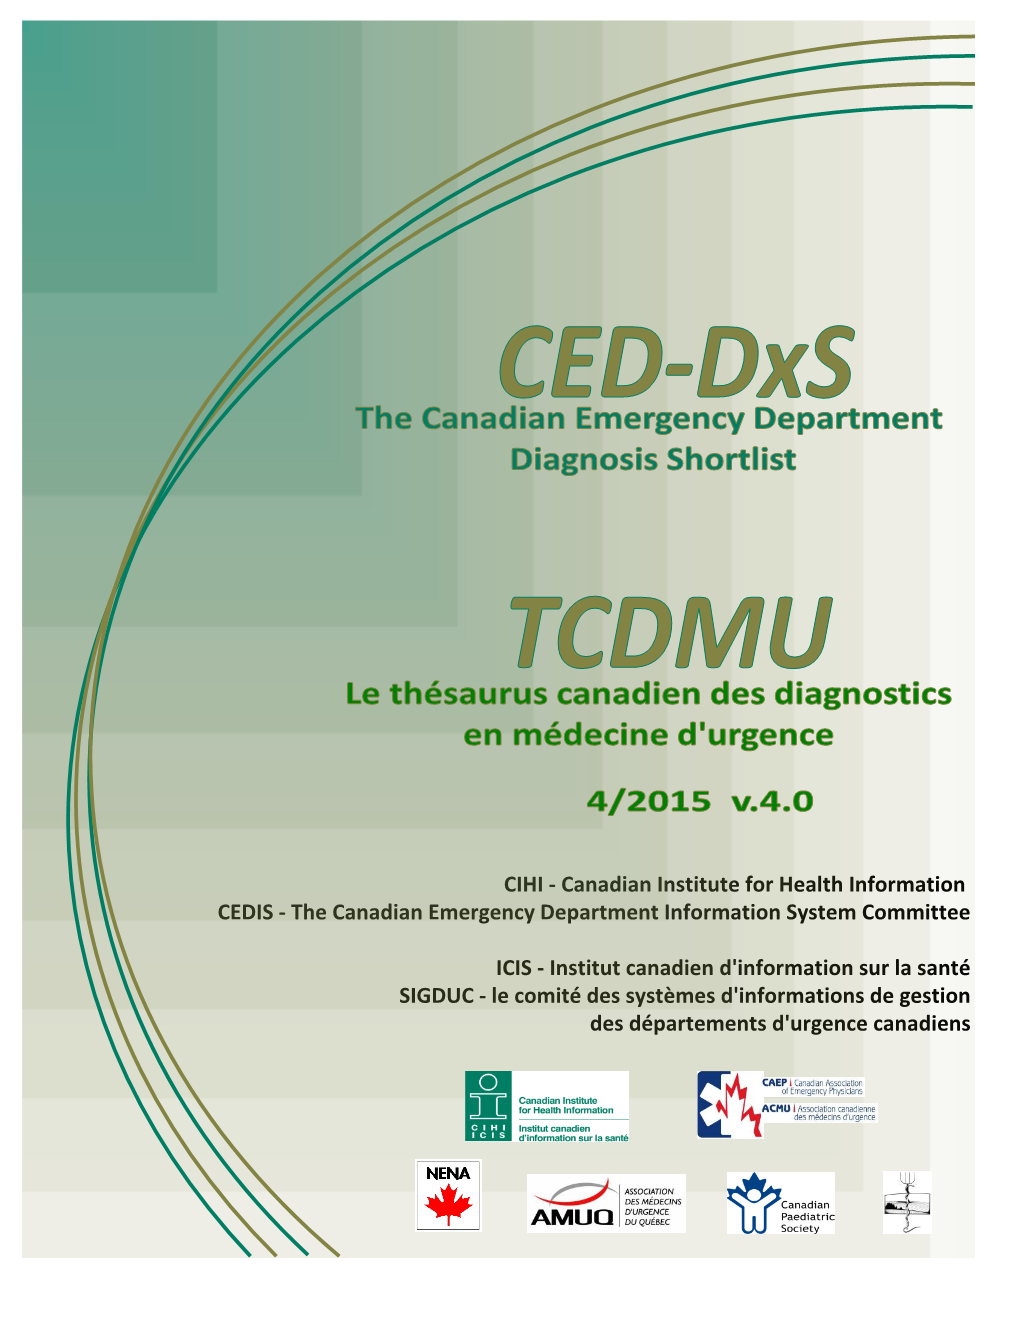 CIHI - Canadian Institute for Health Information CEDIS - the Canadian Emergency Department Information System Committee